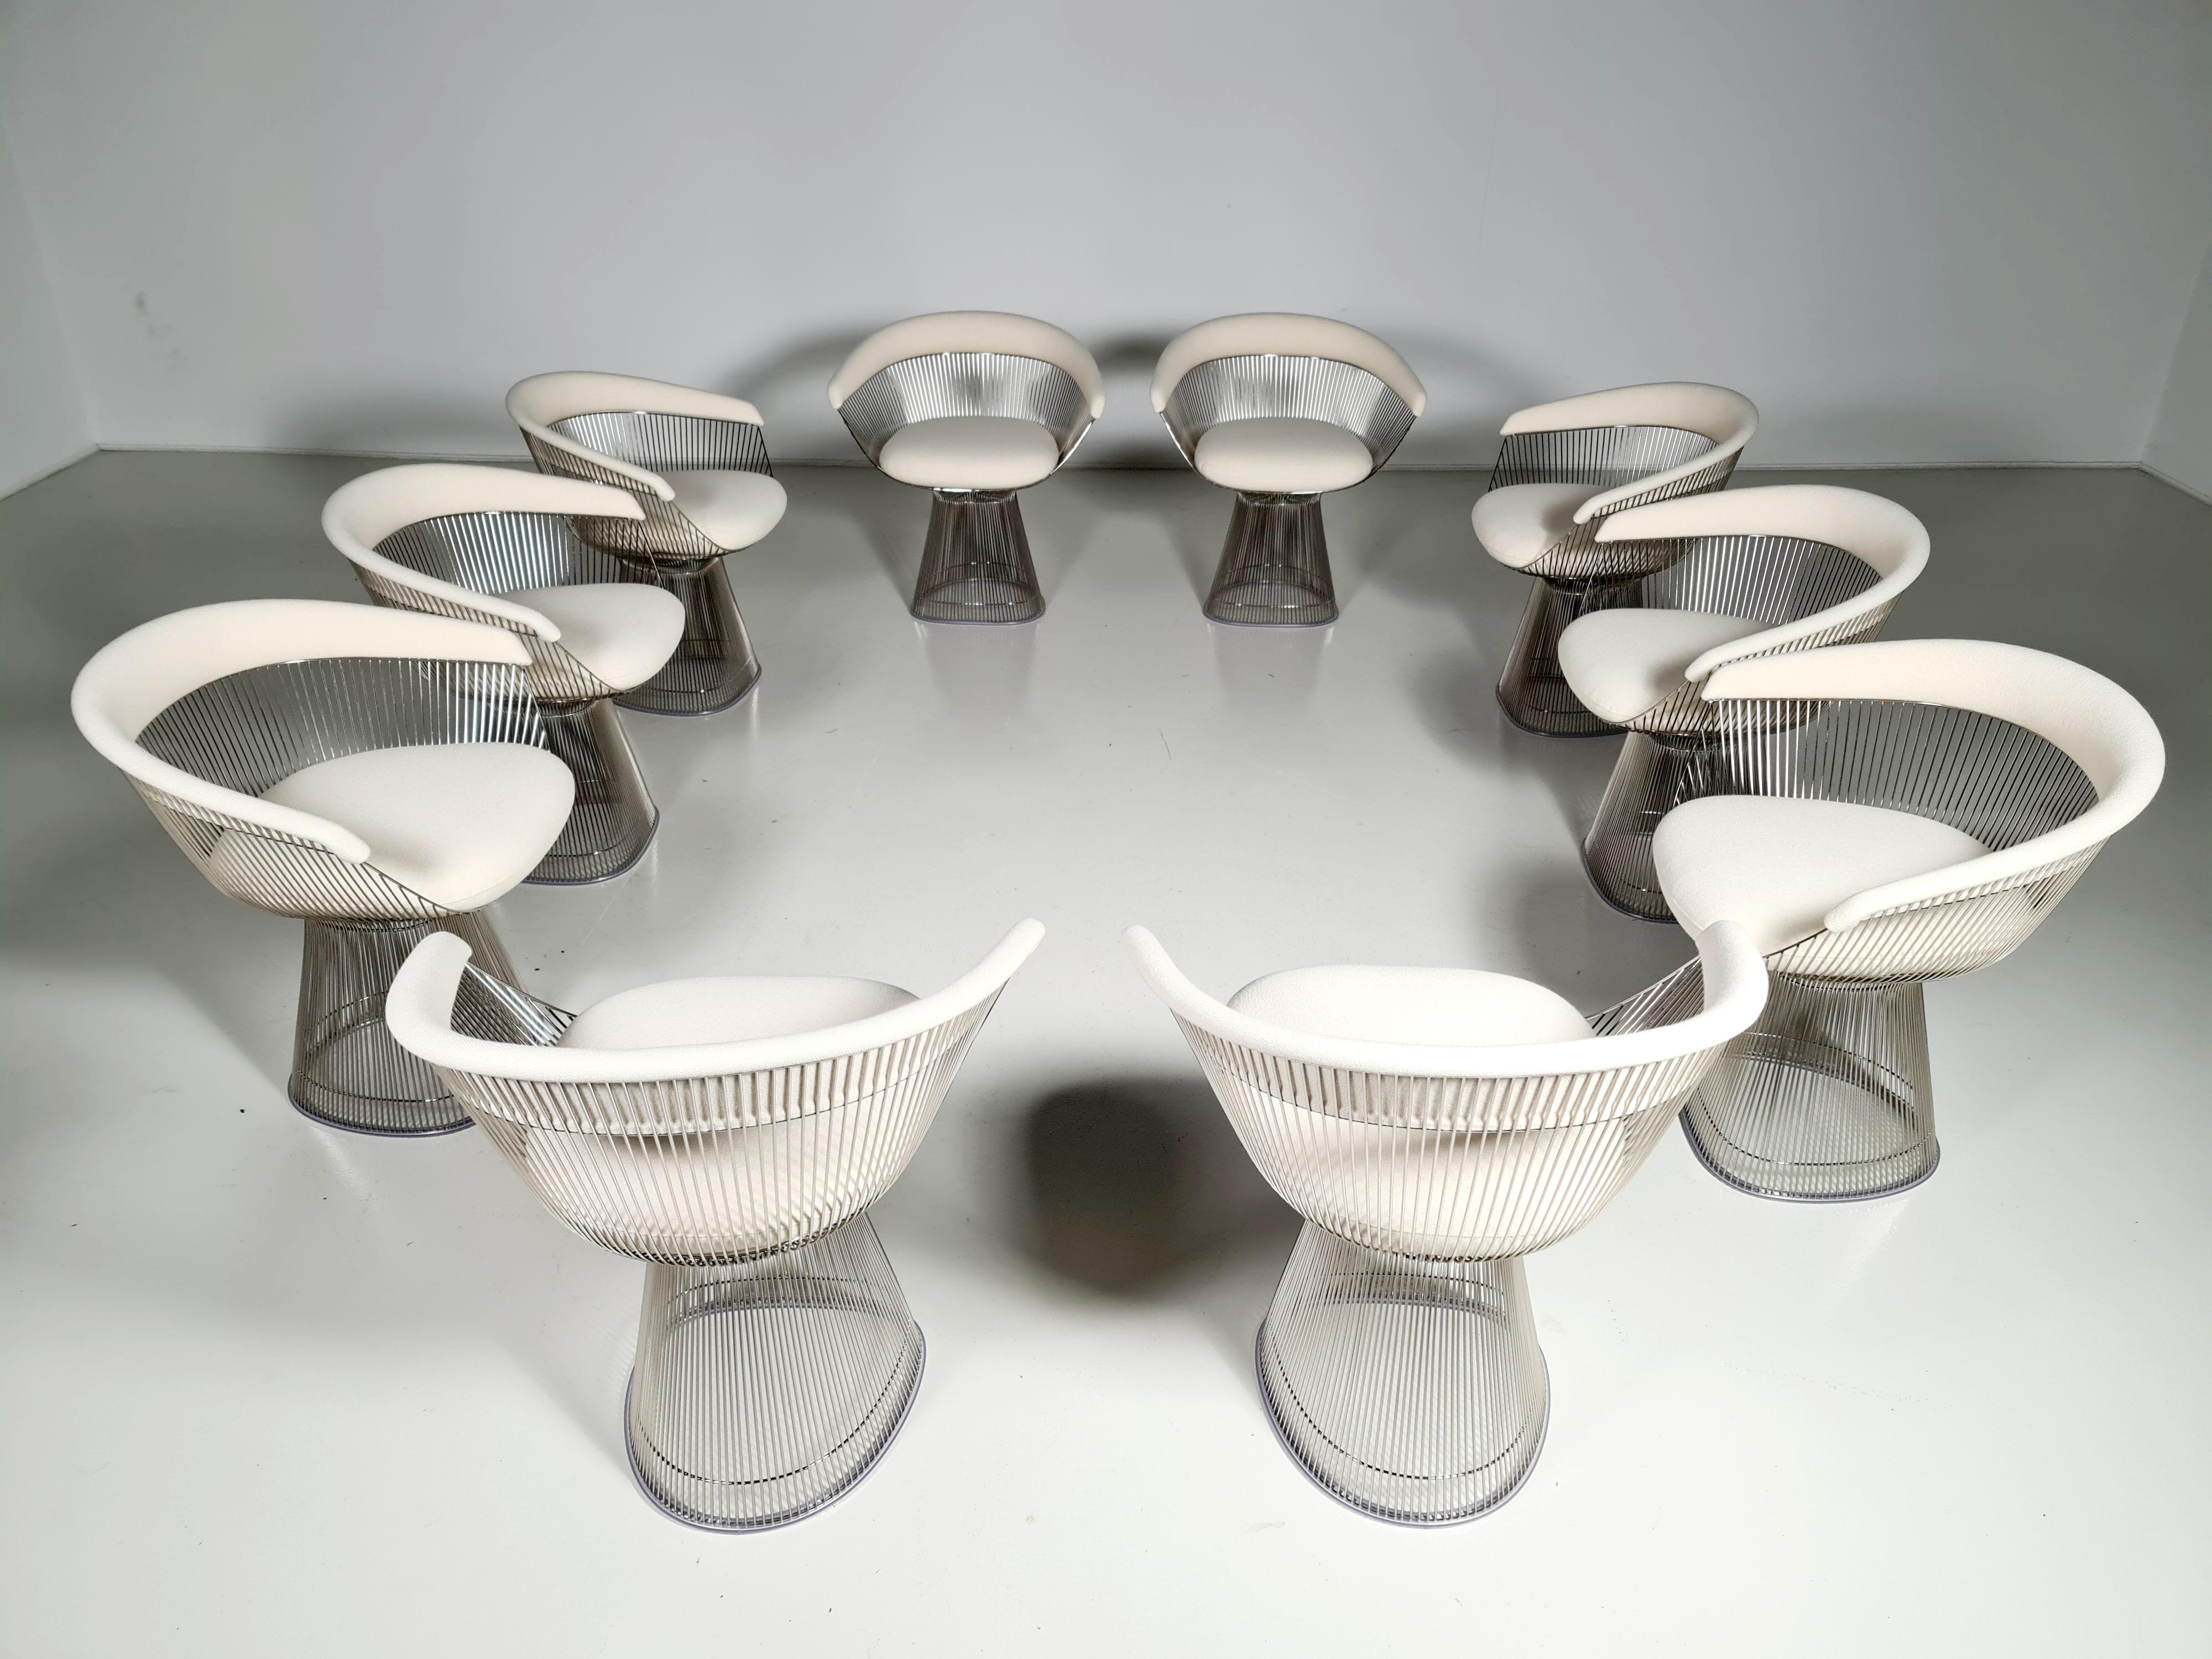 Warren platner sculptural curved wire dining chairs for Knoll International.
Designed in the 1960s, these chairs are timeless and integrate beautifully with many style tables. They function incredibly well as dining chairs as they are extremely